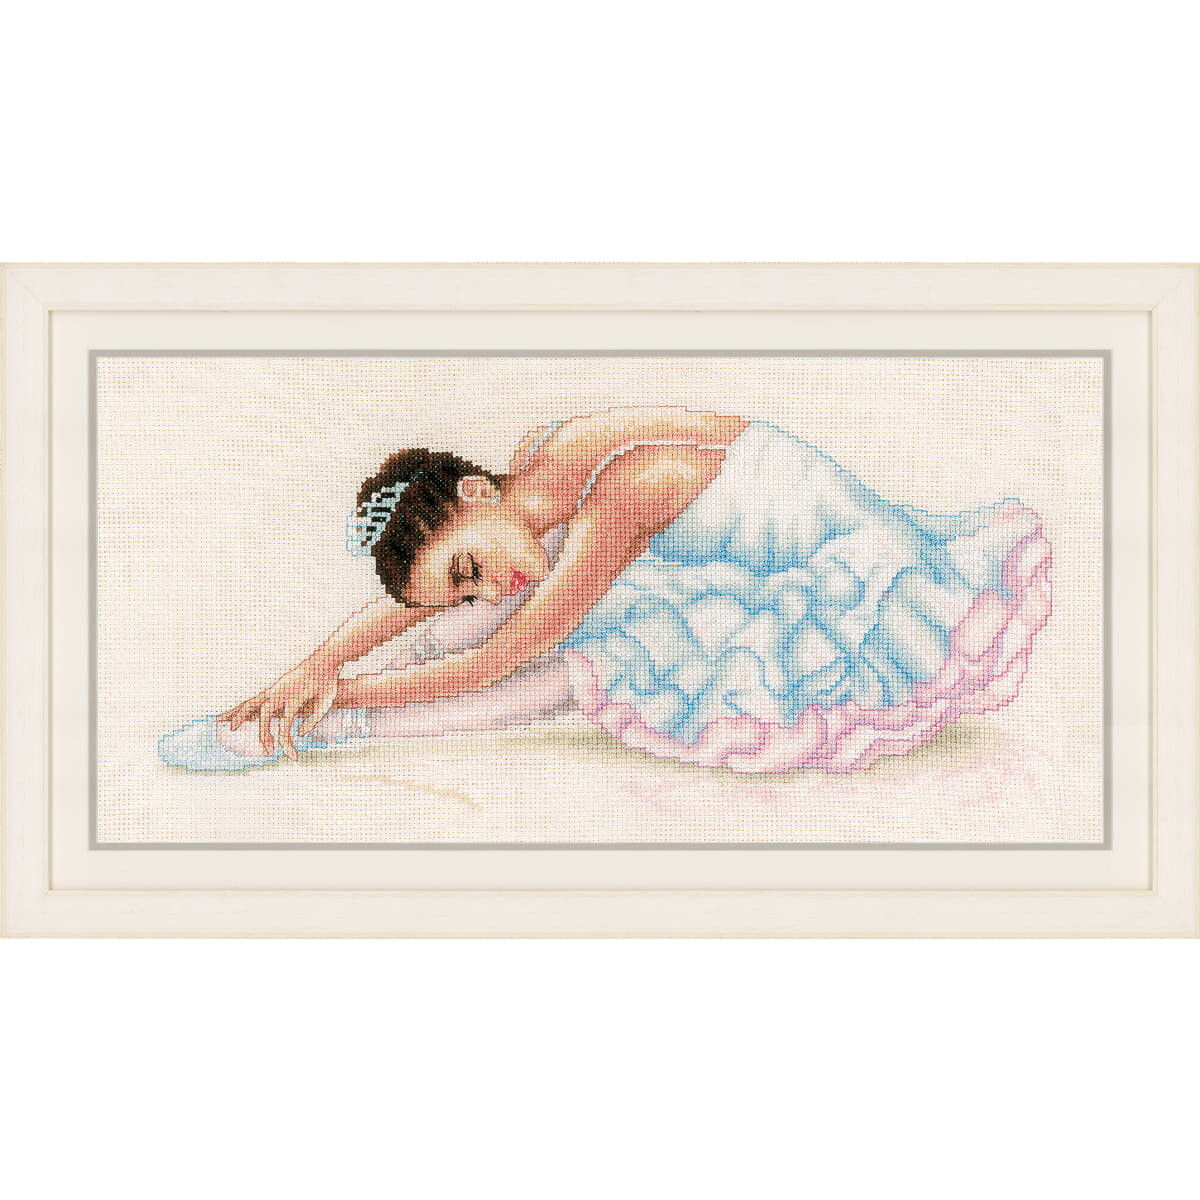 Vervaco counted cross stitch kit "Ballet",...